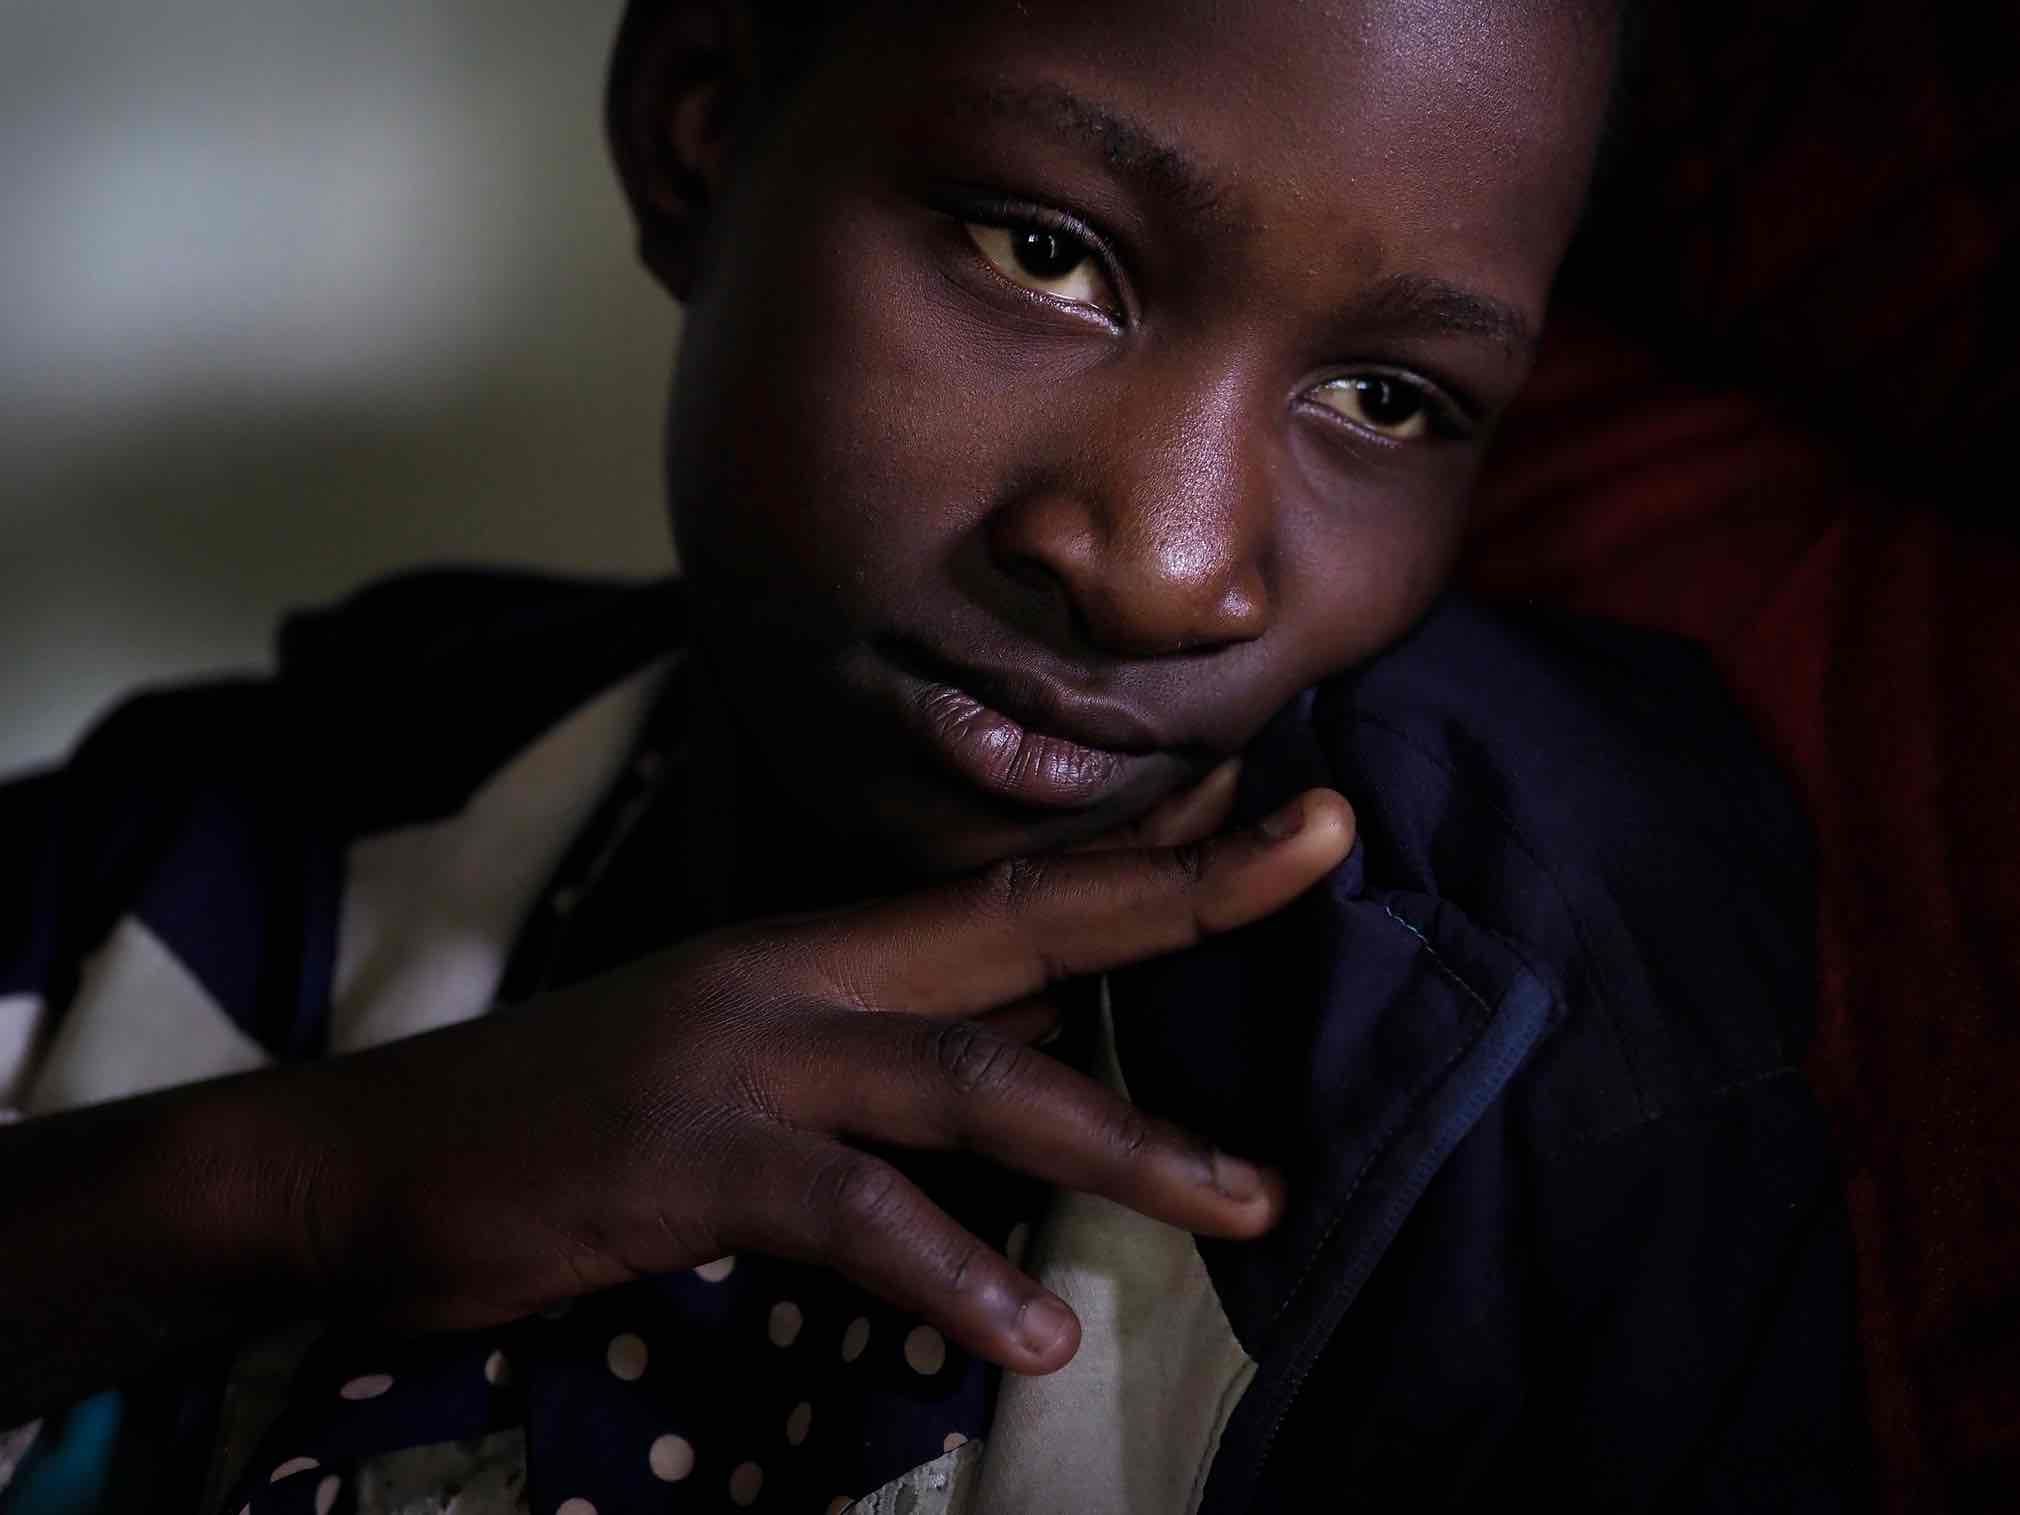 ‘Landscapes do well to describe the immediate scenes, but the gut-wrenching reality of the human toll is more difficult to describe in photographs,’ says photographer Larry Price. ‘My approach was to also humanise the tragedy of Kabwe.’ This portrait is of lead poisoning victim Fostina Kasaila, 11. ‘I want to be a soldier,’ she said. ‘I want to protect people.’ Image by Larry C. Price. Zambia, 2017.